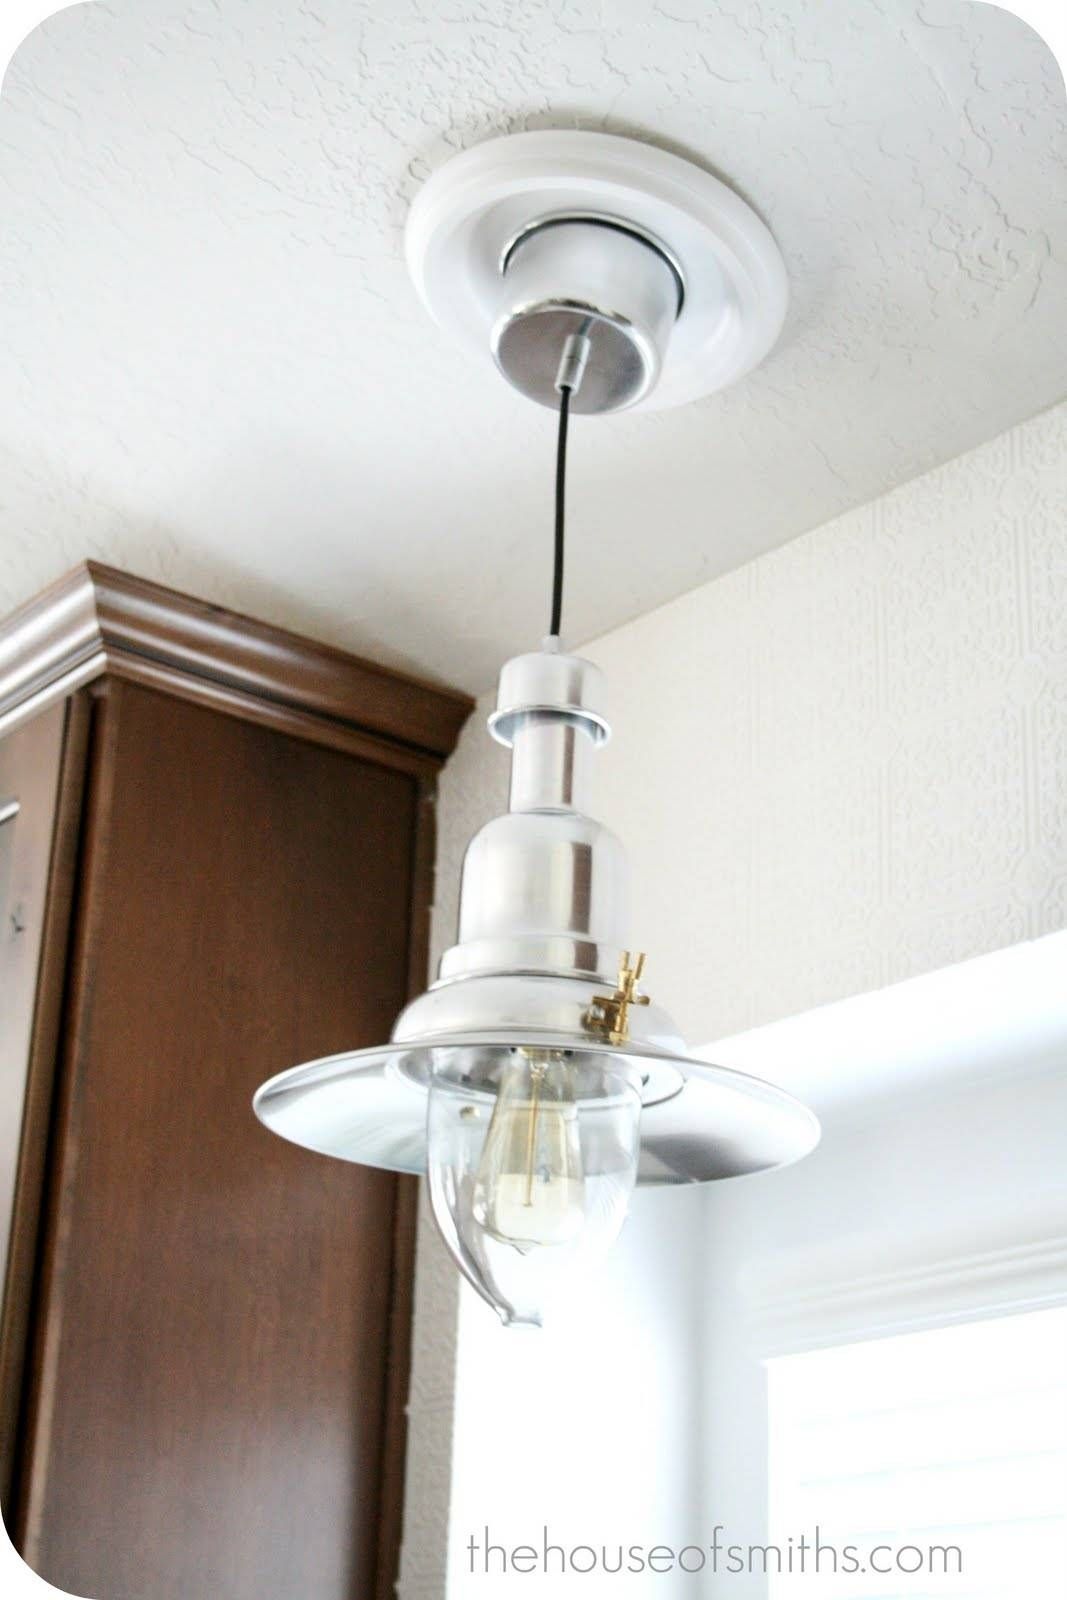 New Kitchen Lighting – Converting A Can Light With A Recessed Regarding Recessed Lighting Pendants (View 12 of 15)